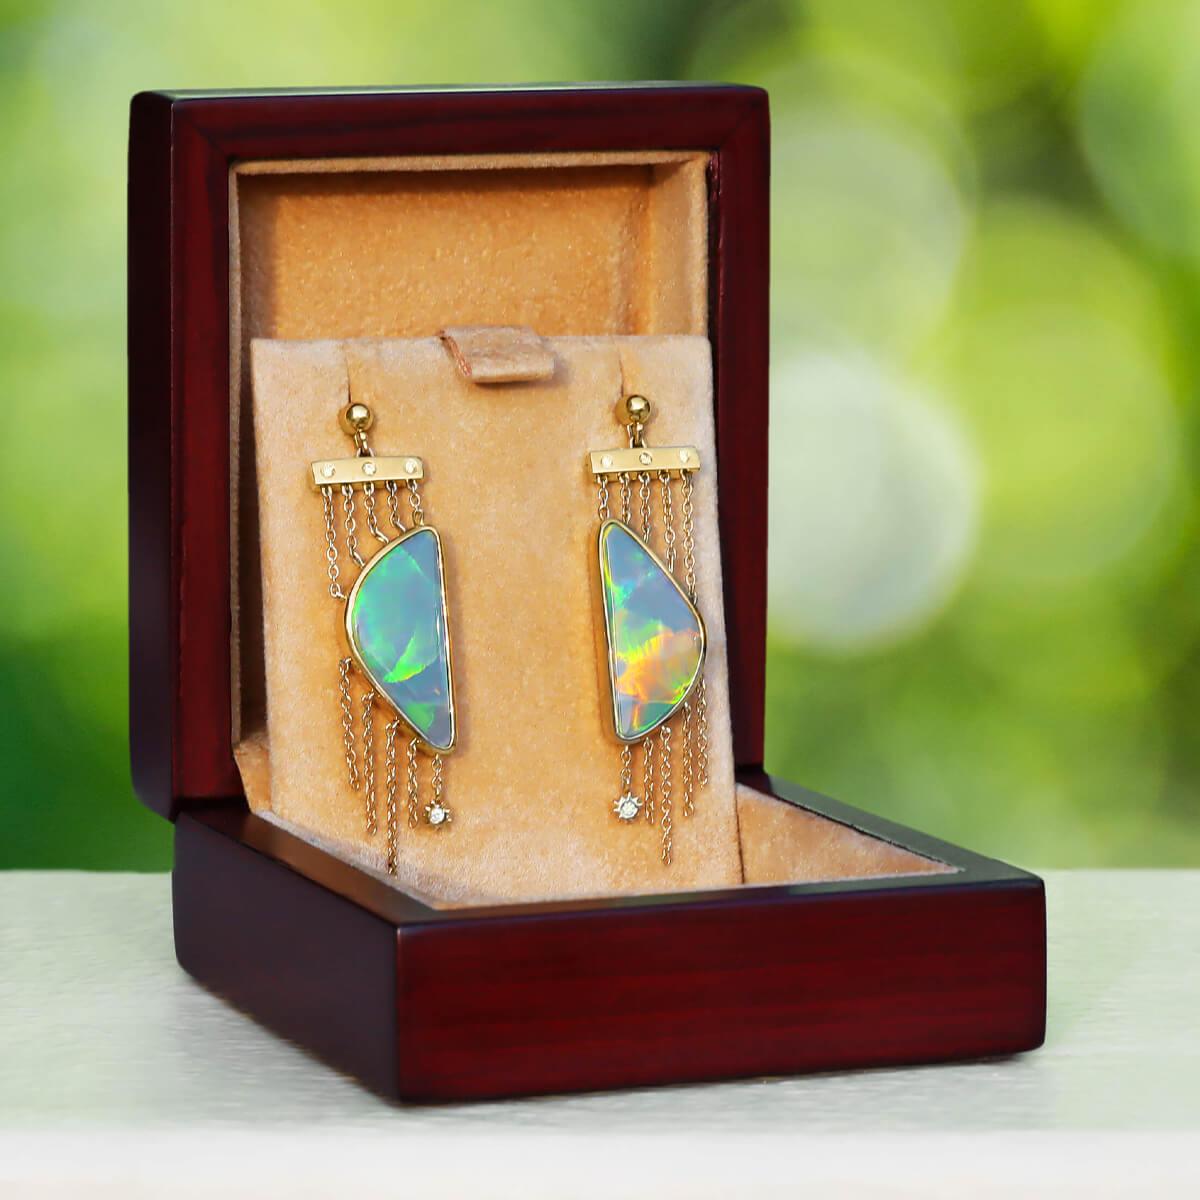 SPECIFICATIONS
Opal Type: Dark Opal
Opal Weight: 13.77ct
Diamonds: 0.08ct D IF - F VVS
Metals: 18K solid Gold

THE GRYFFIN OPAL DIFFERENCE
By investing in solid Australian opal jewellery by House Gryffin, you are choosing ethical, sustainable